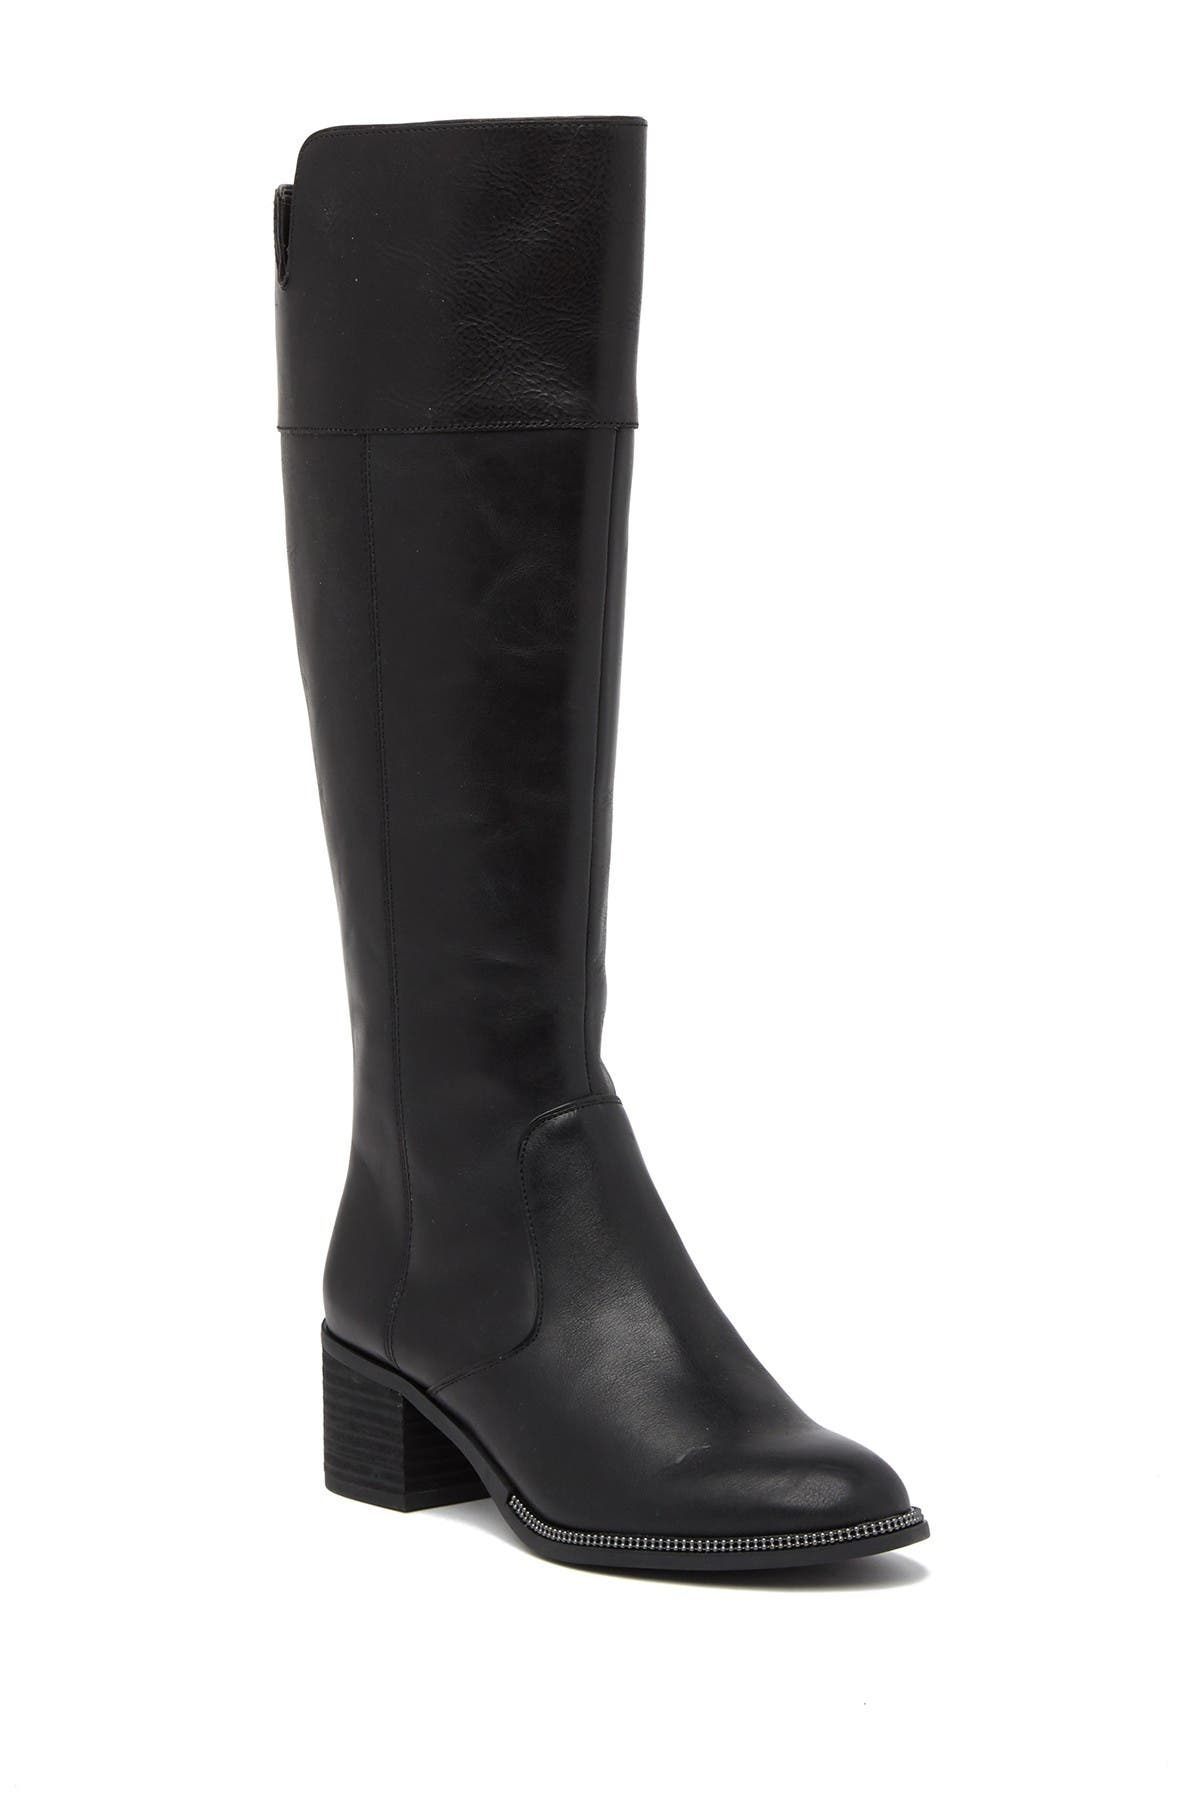 nordstrom tall boots